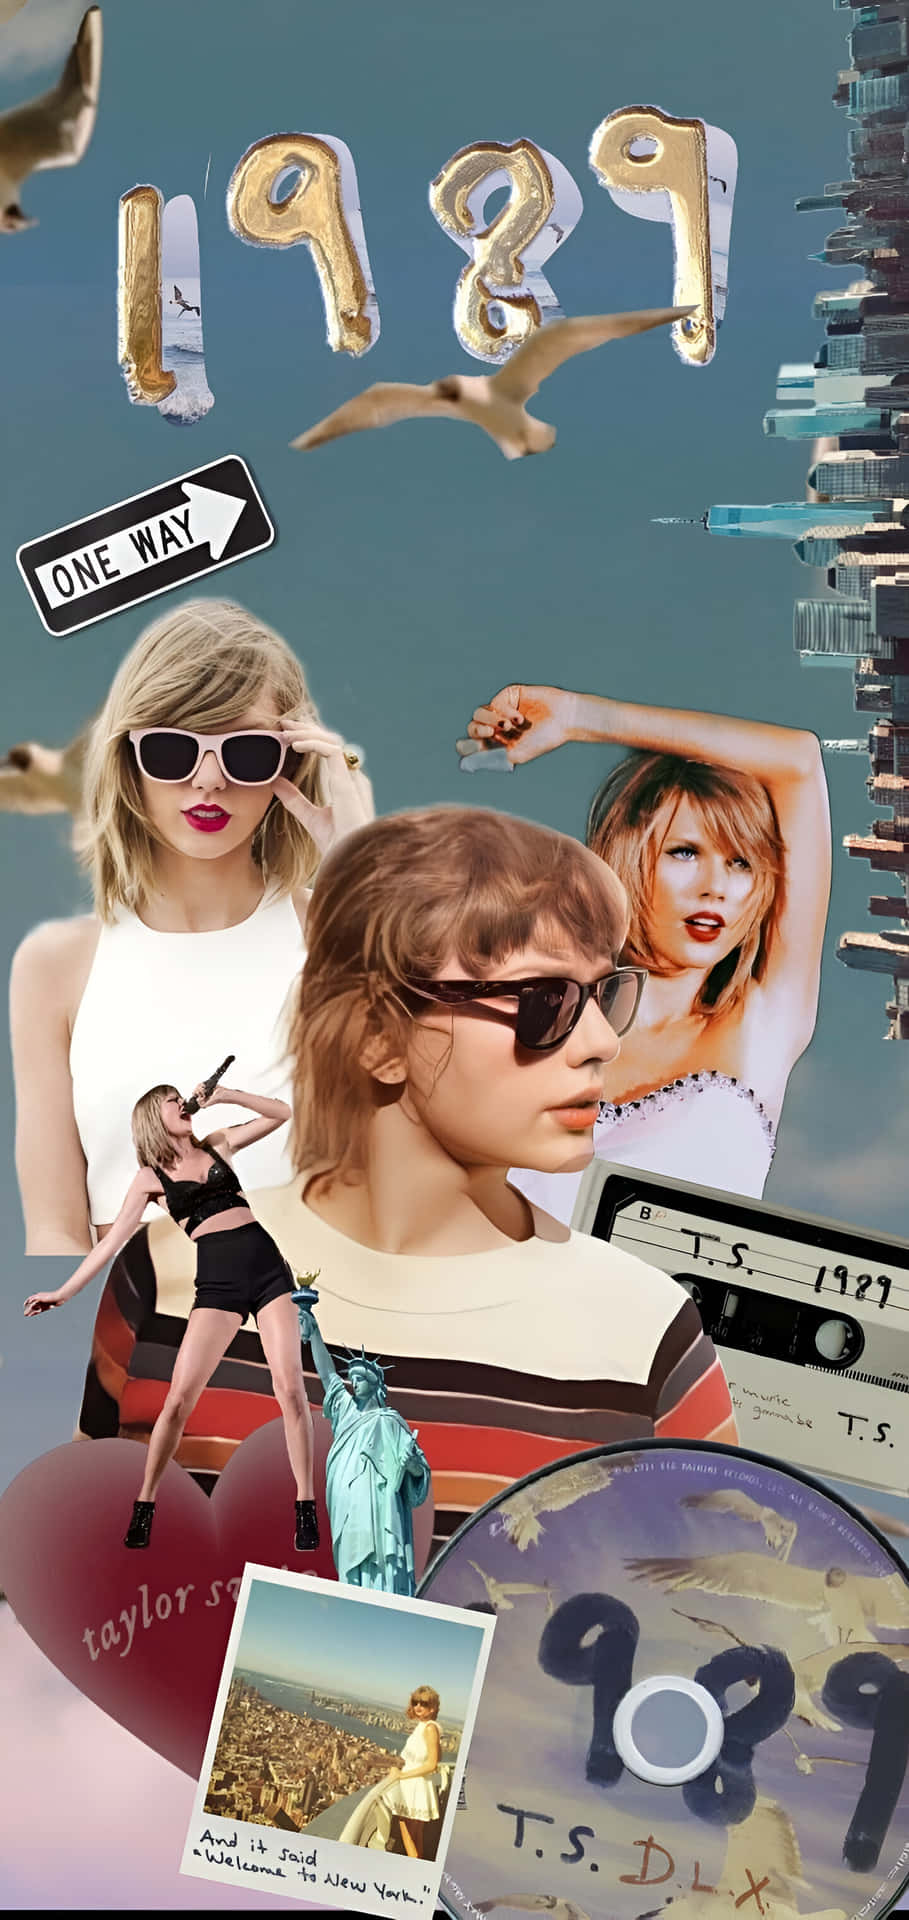 1989 Taylor Swift Collage Wallpaper